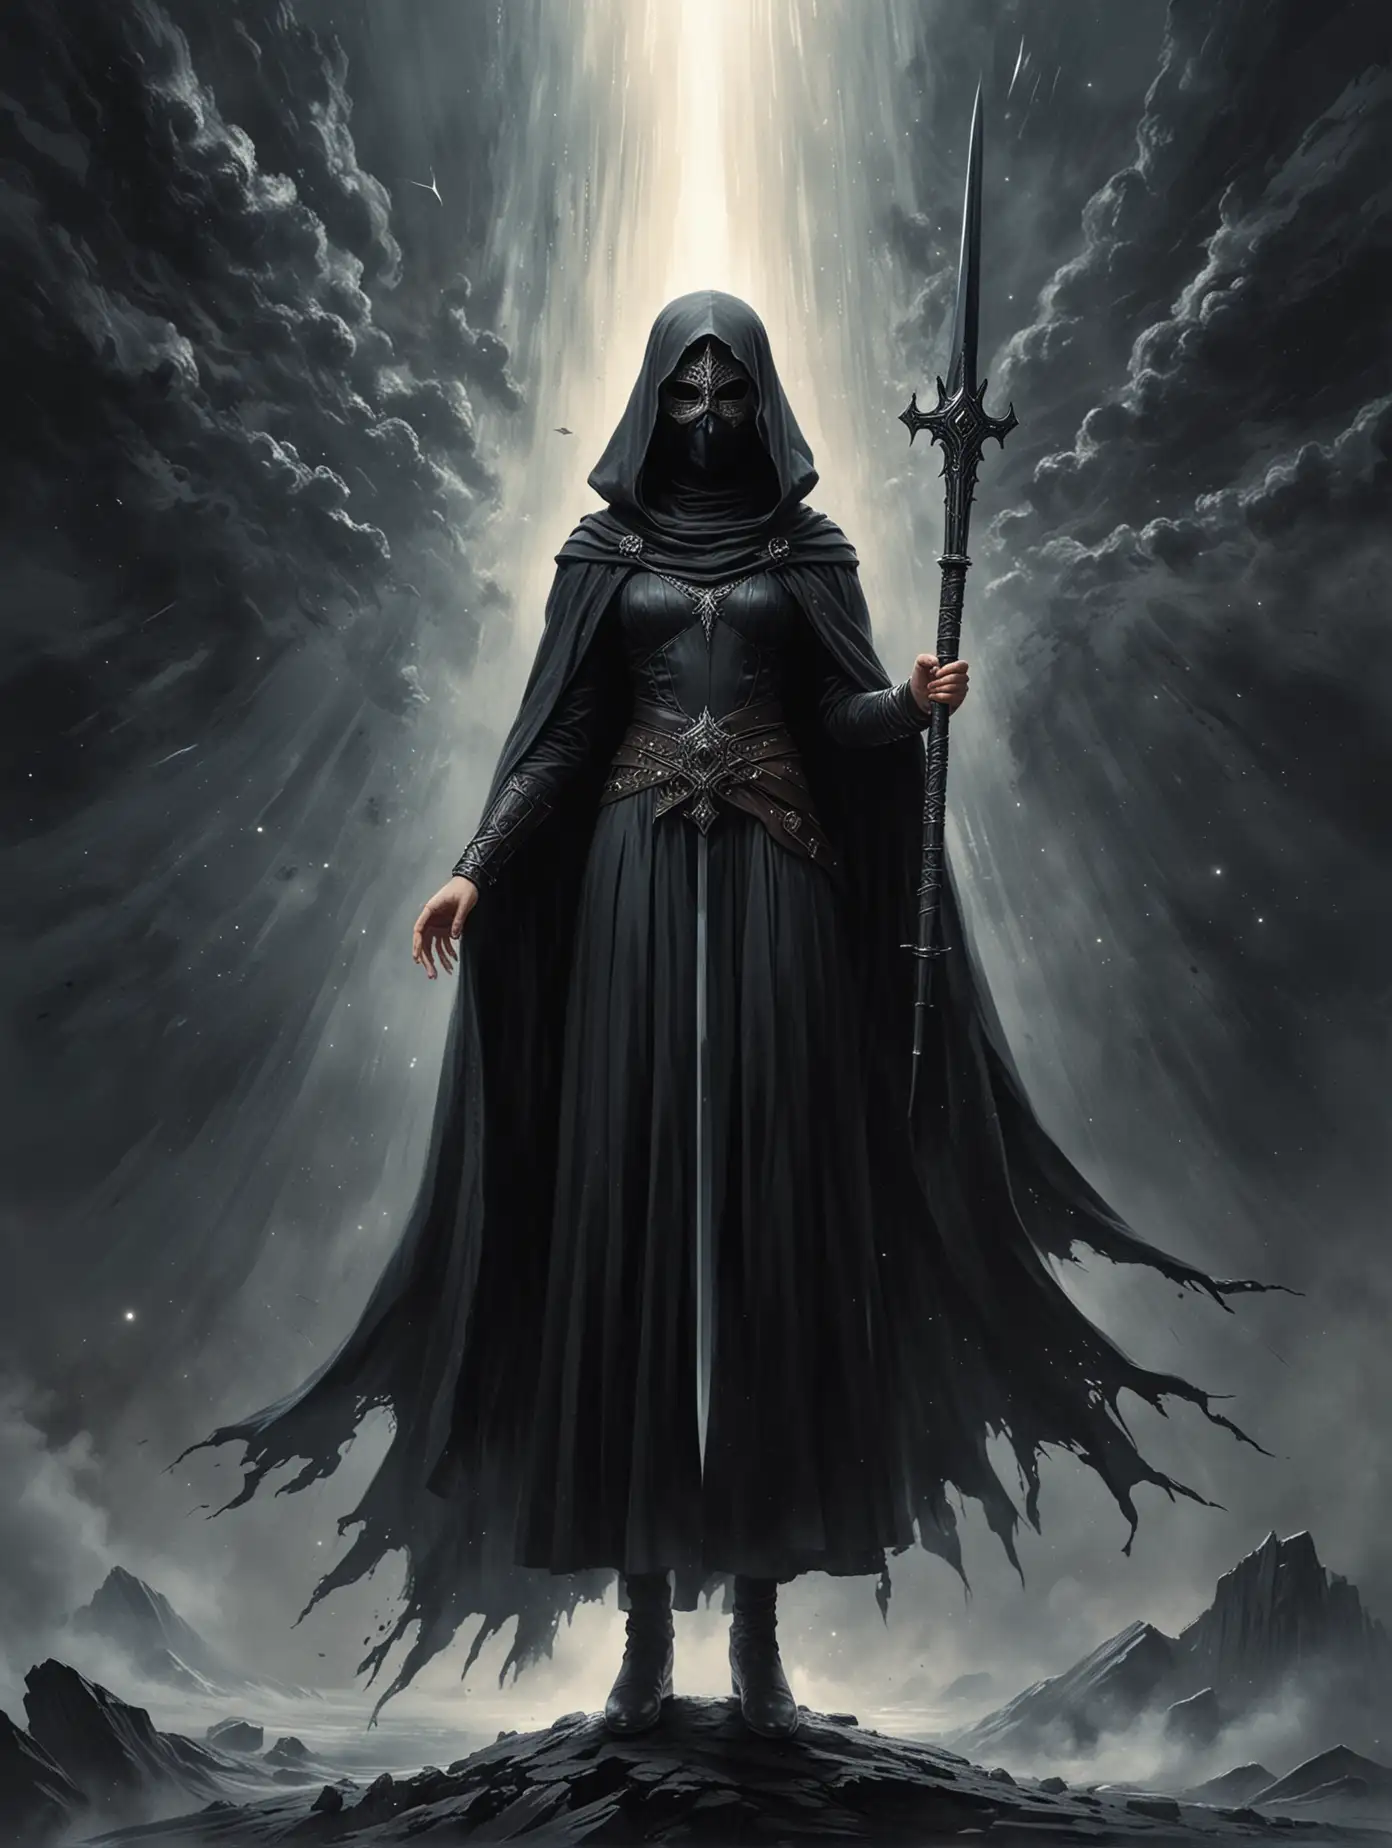 Sister-Geserit-Confronts-Cosmic-Abyss-with-Crowned-Sword-in-Hand